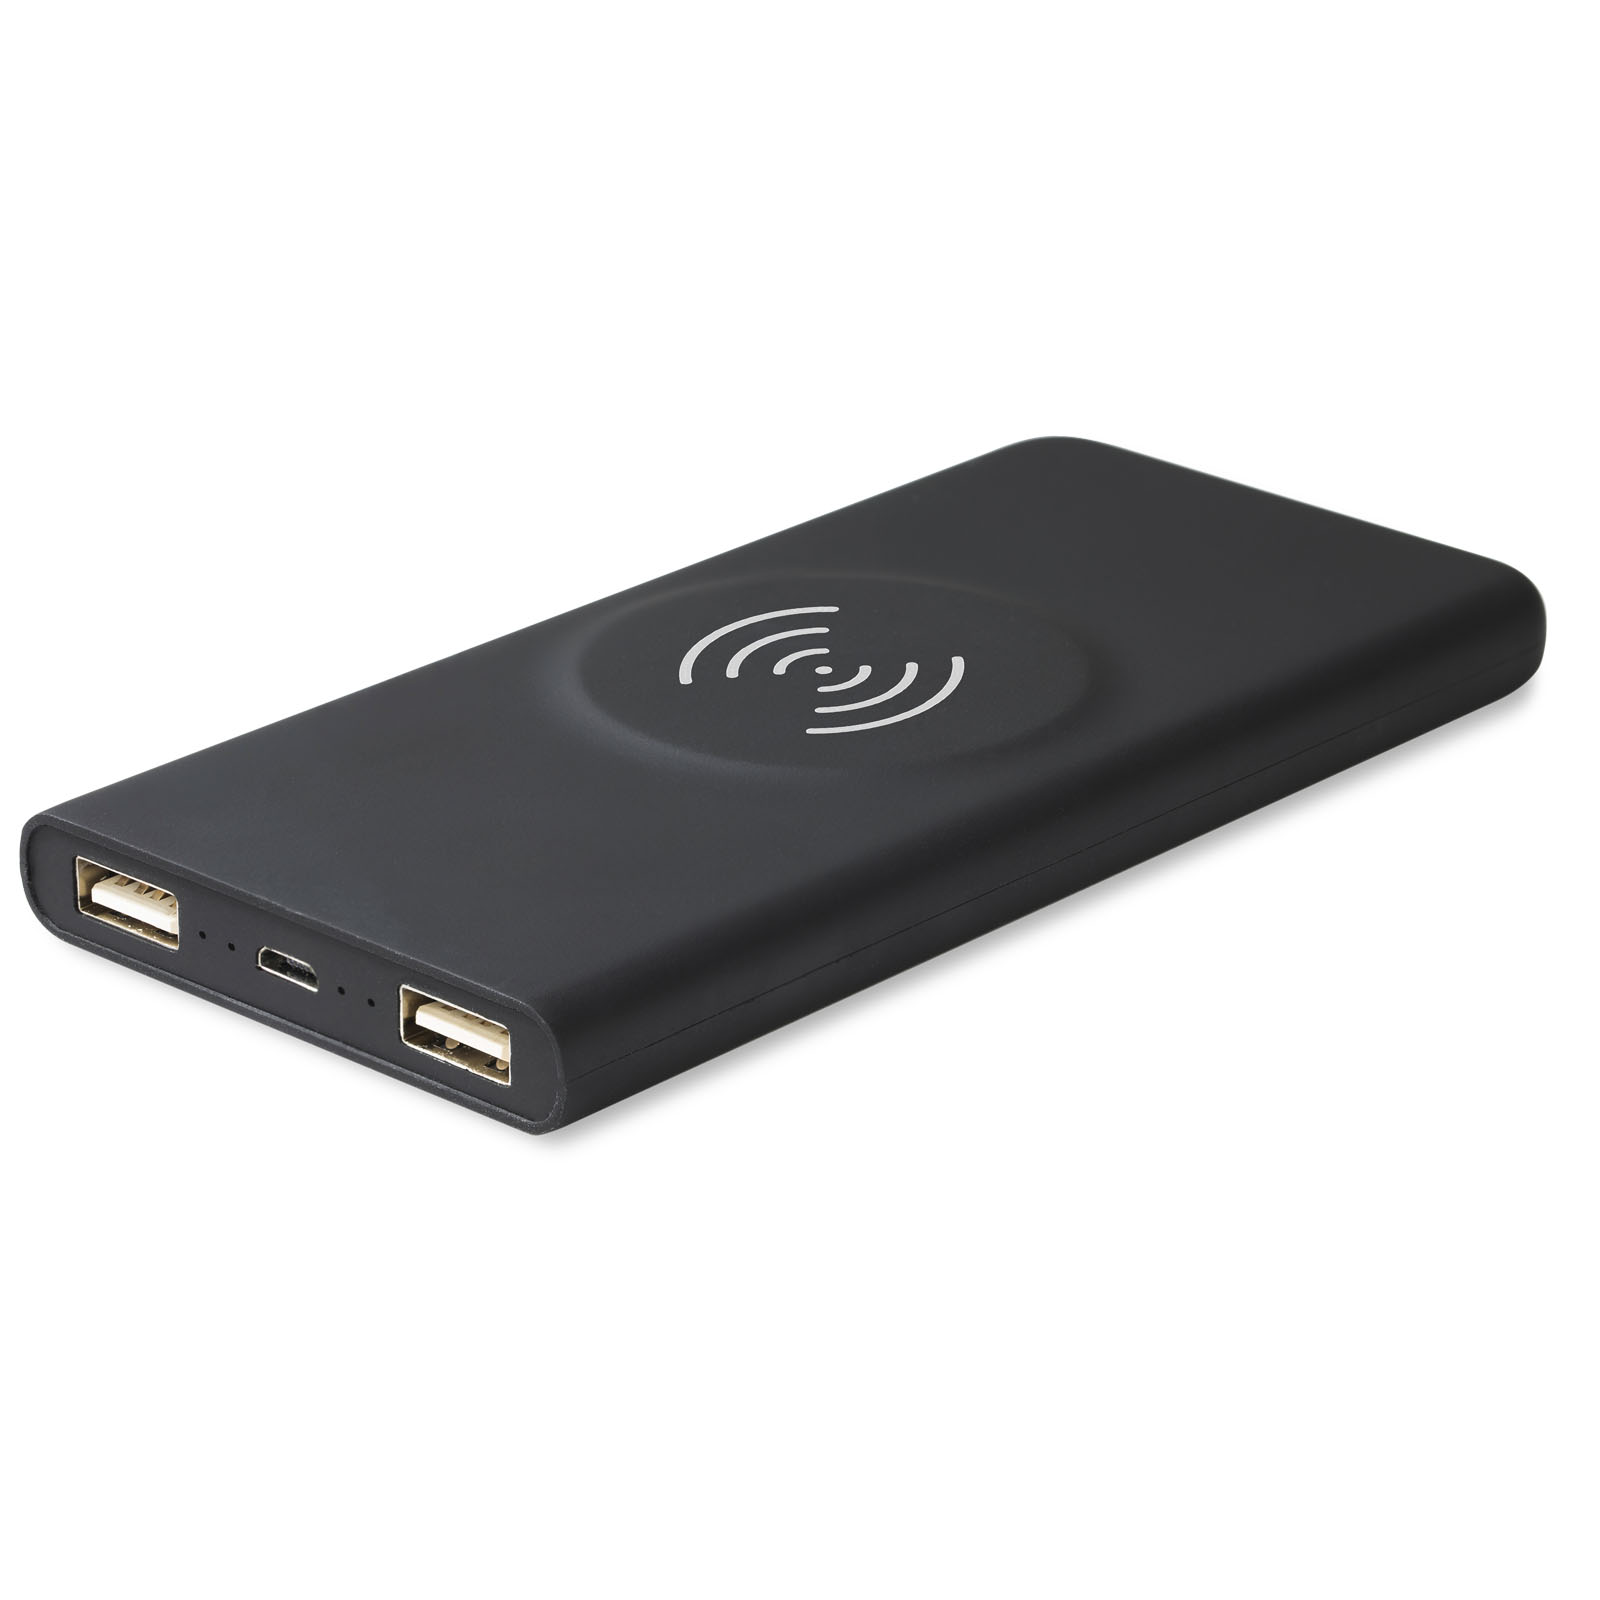 This is a power bank made of rubber material and has a wireless feature. It has a logo that lights up, enhancing its appearance. It also comes with a 3-in-1 cable made from recycled PET plastic, promoting eco-friendliness. - Cullompton